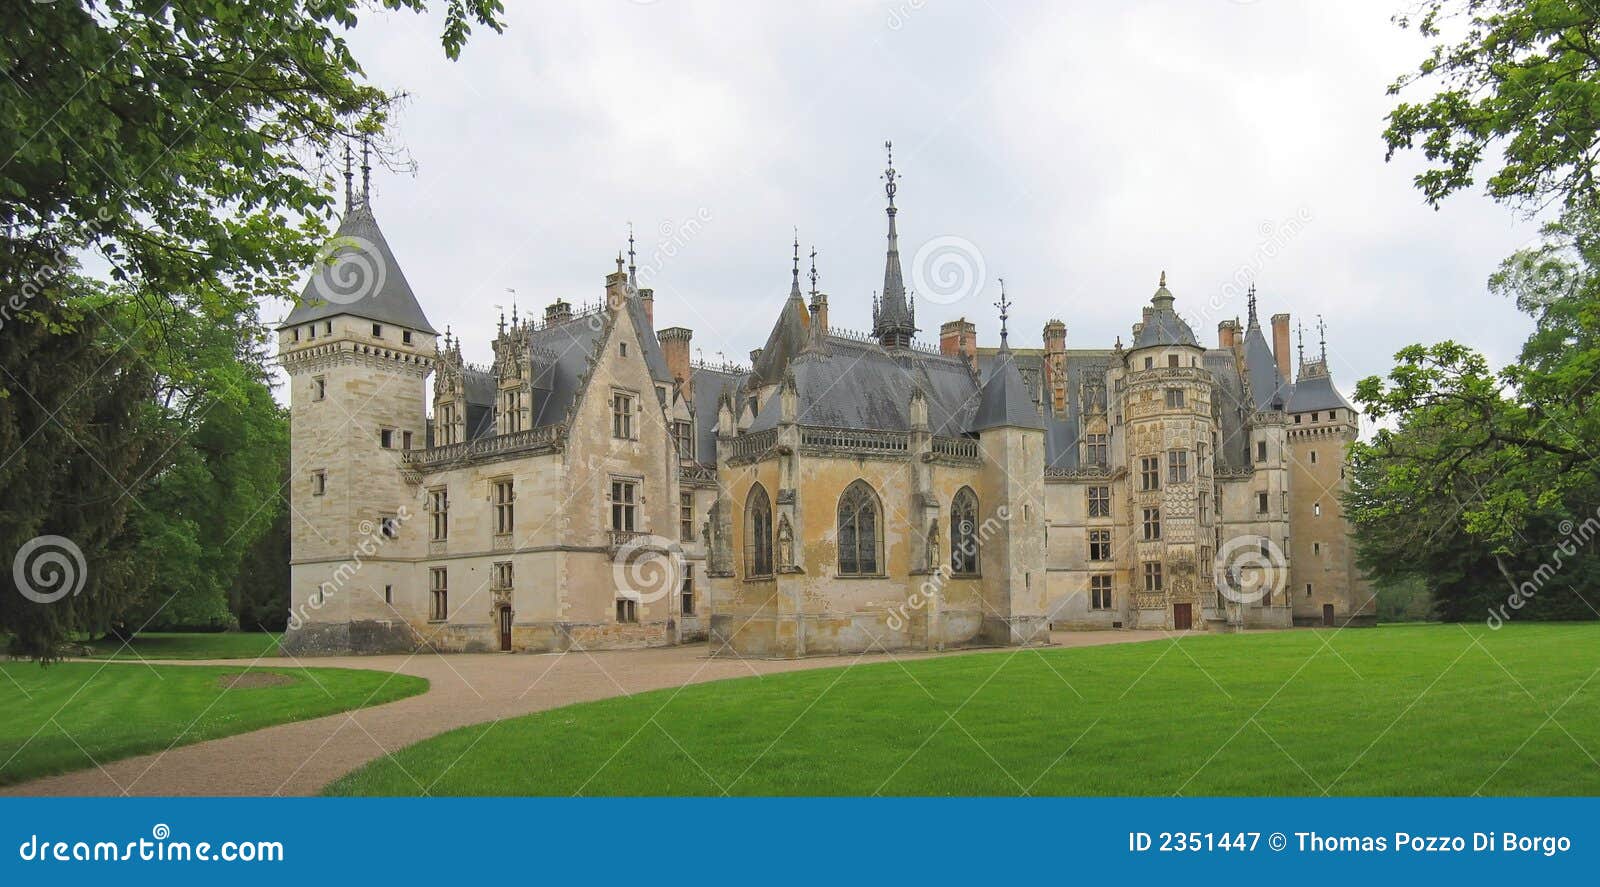 large vista of a french castle